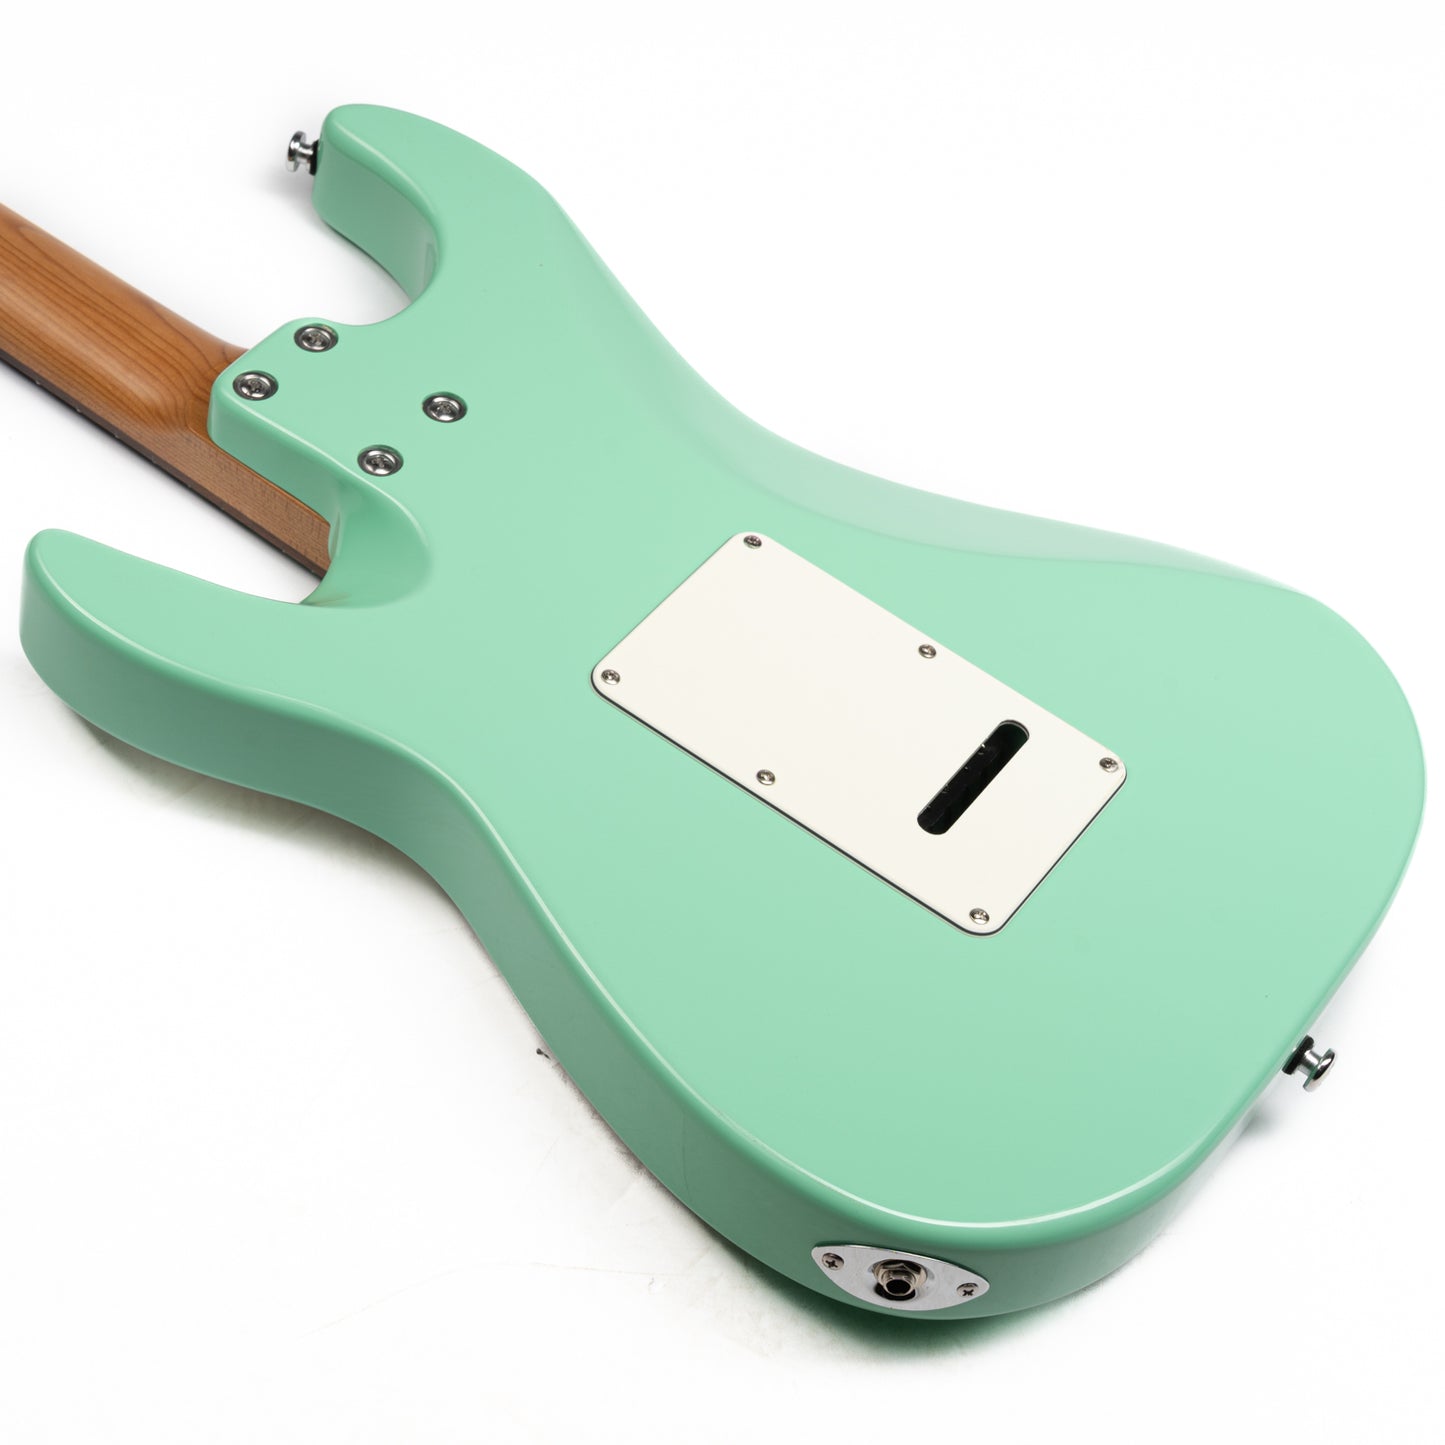 Eart Guitars, CP-1, HSS Pickups Classical Stainless Steel Fret Electric Guitar, Surf Green